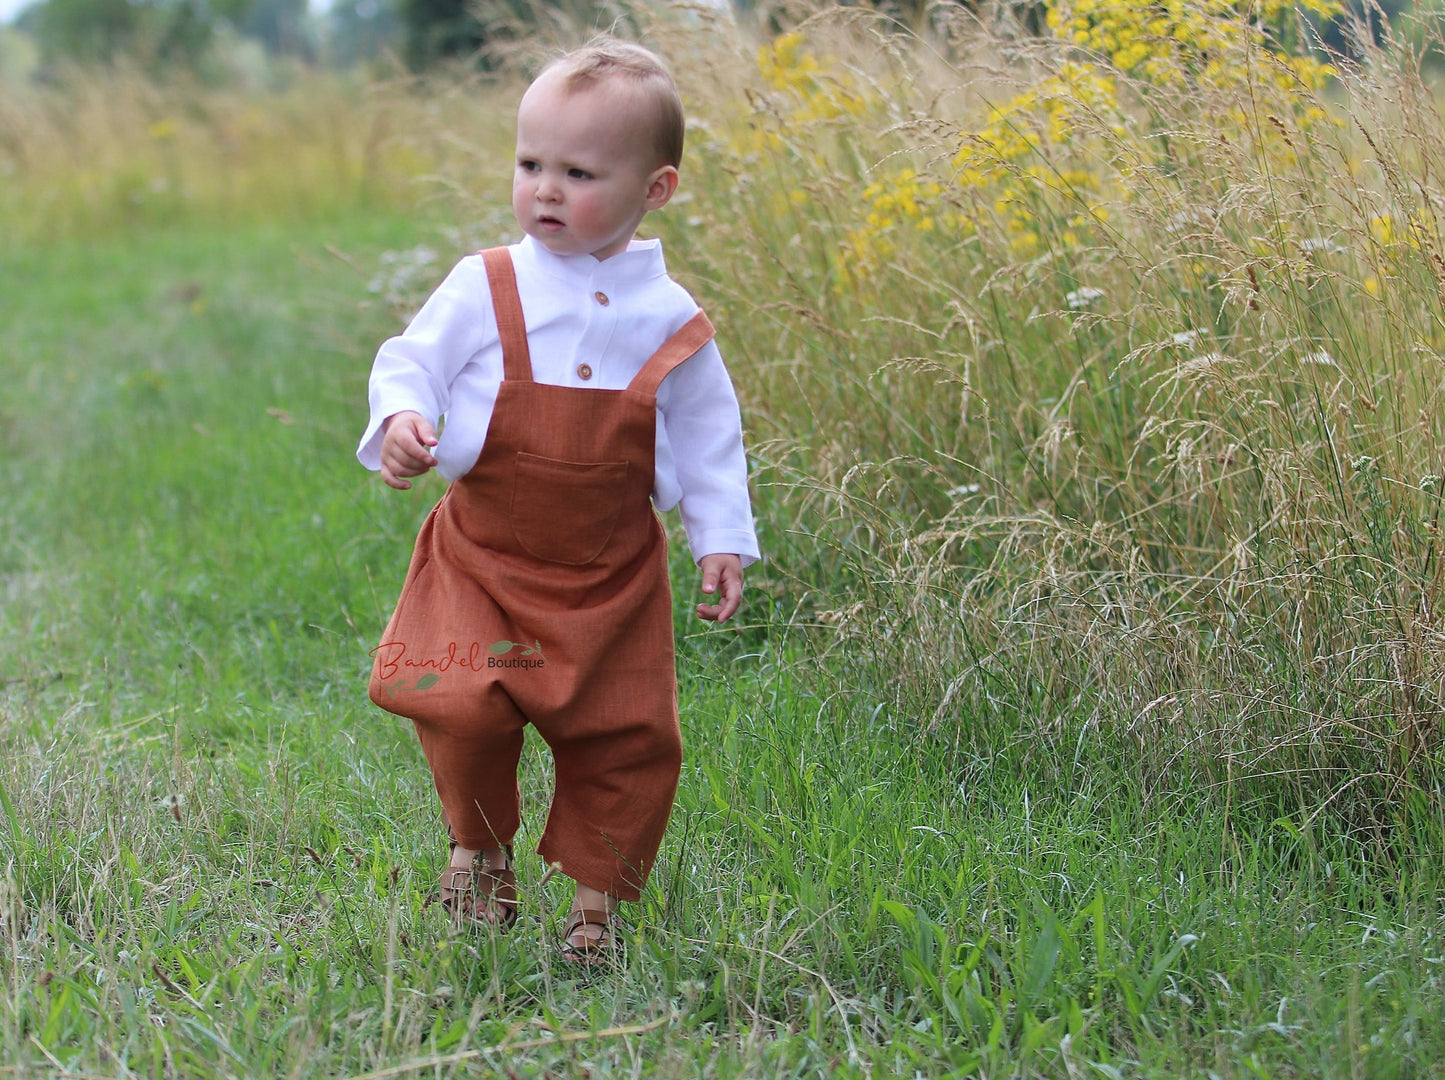 Rust Linen baby romper dungarees feature 3/4 length shorts with a traditional curved front pocket. The elastic back waistband and adjustable tie straps provide a secure fit, and the wooden button closure at the back creates a stylish look.